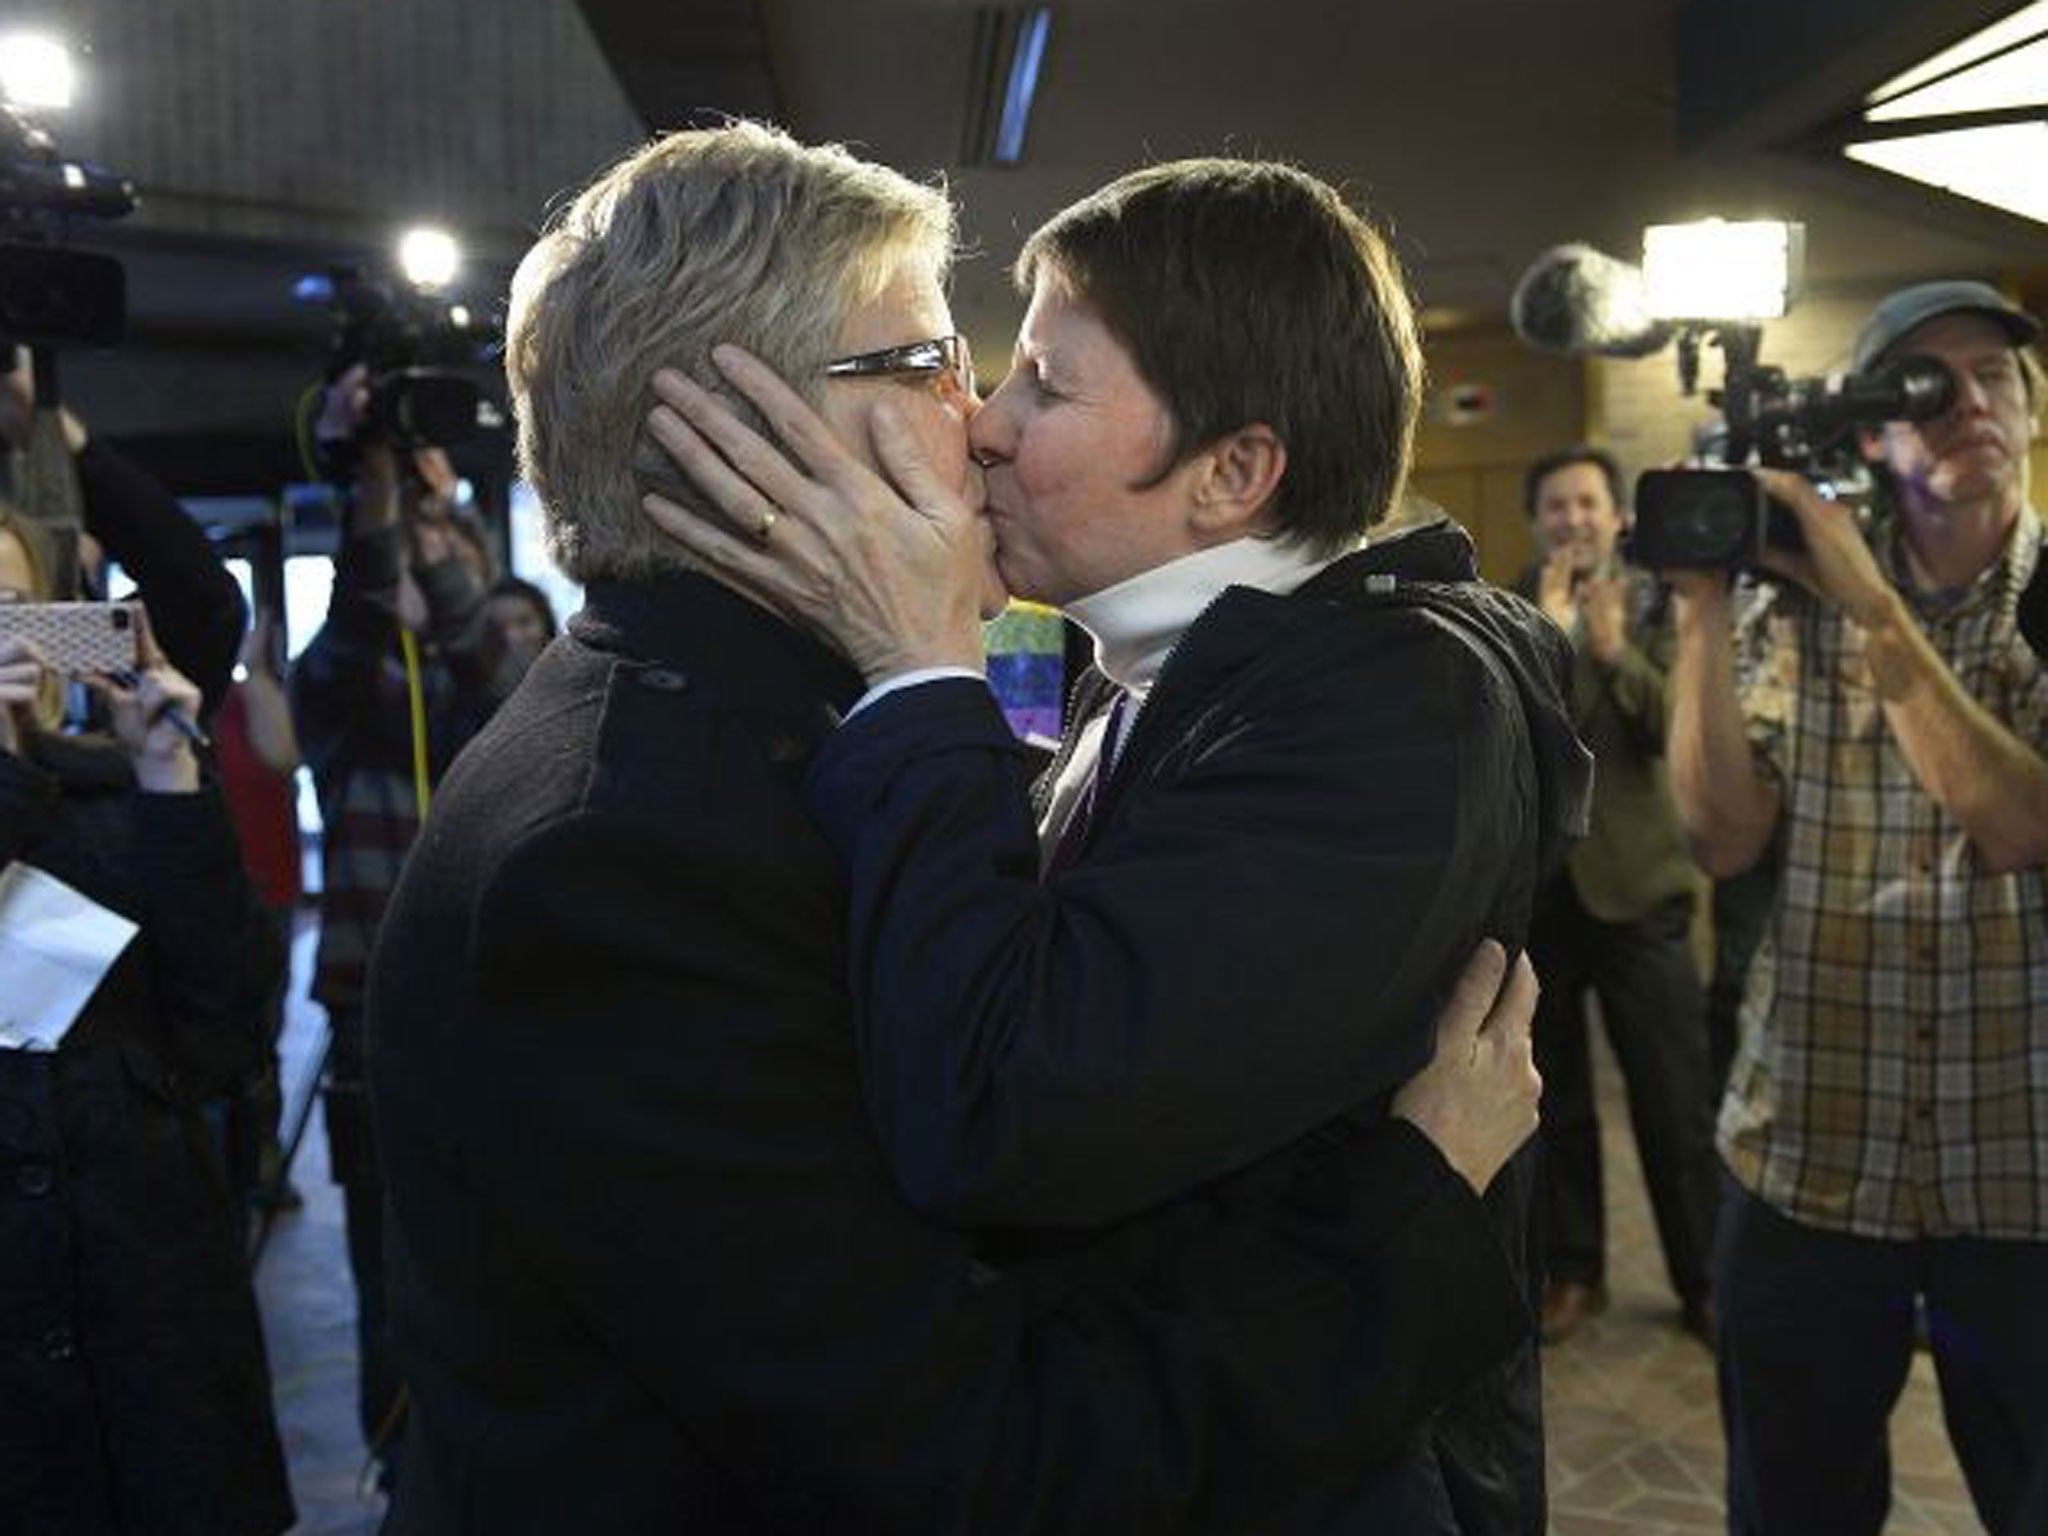 Laurie Wood, left, and Kody Partridge, kiss after being told they are officially married by the Rev. Curtis L. Price in the lobby of the Salt Lake County offices, Friday, December 20, 2013, in Salt Lake City.